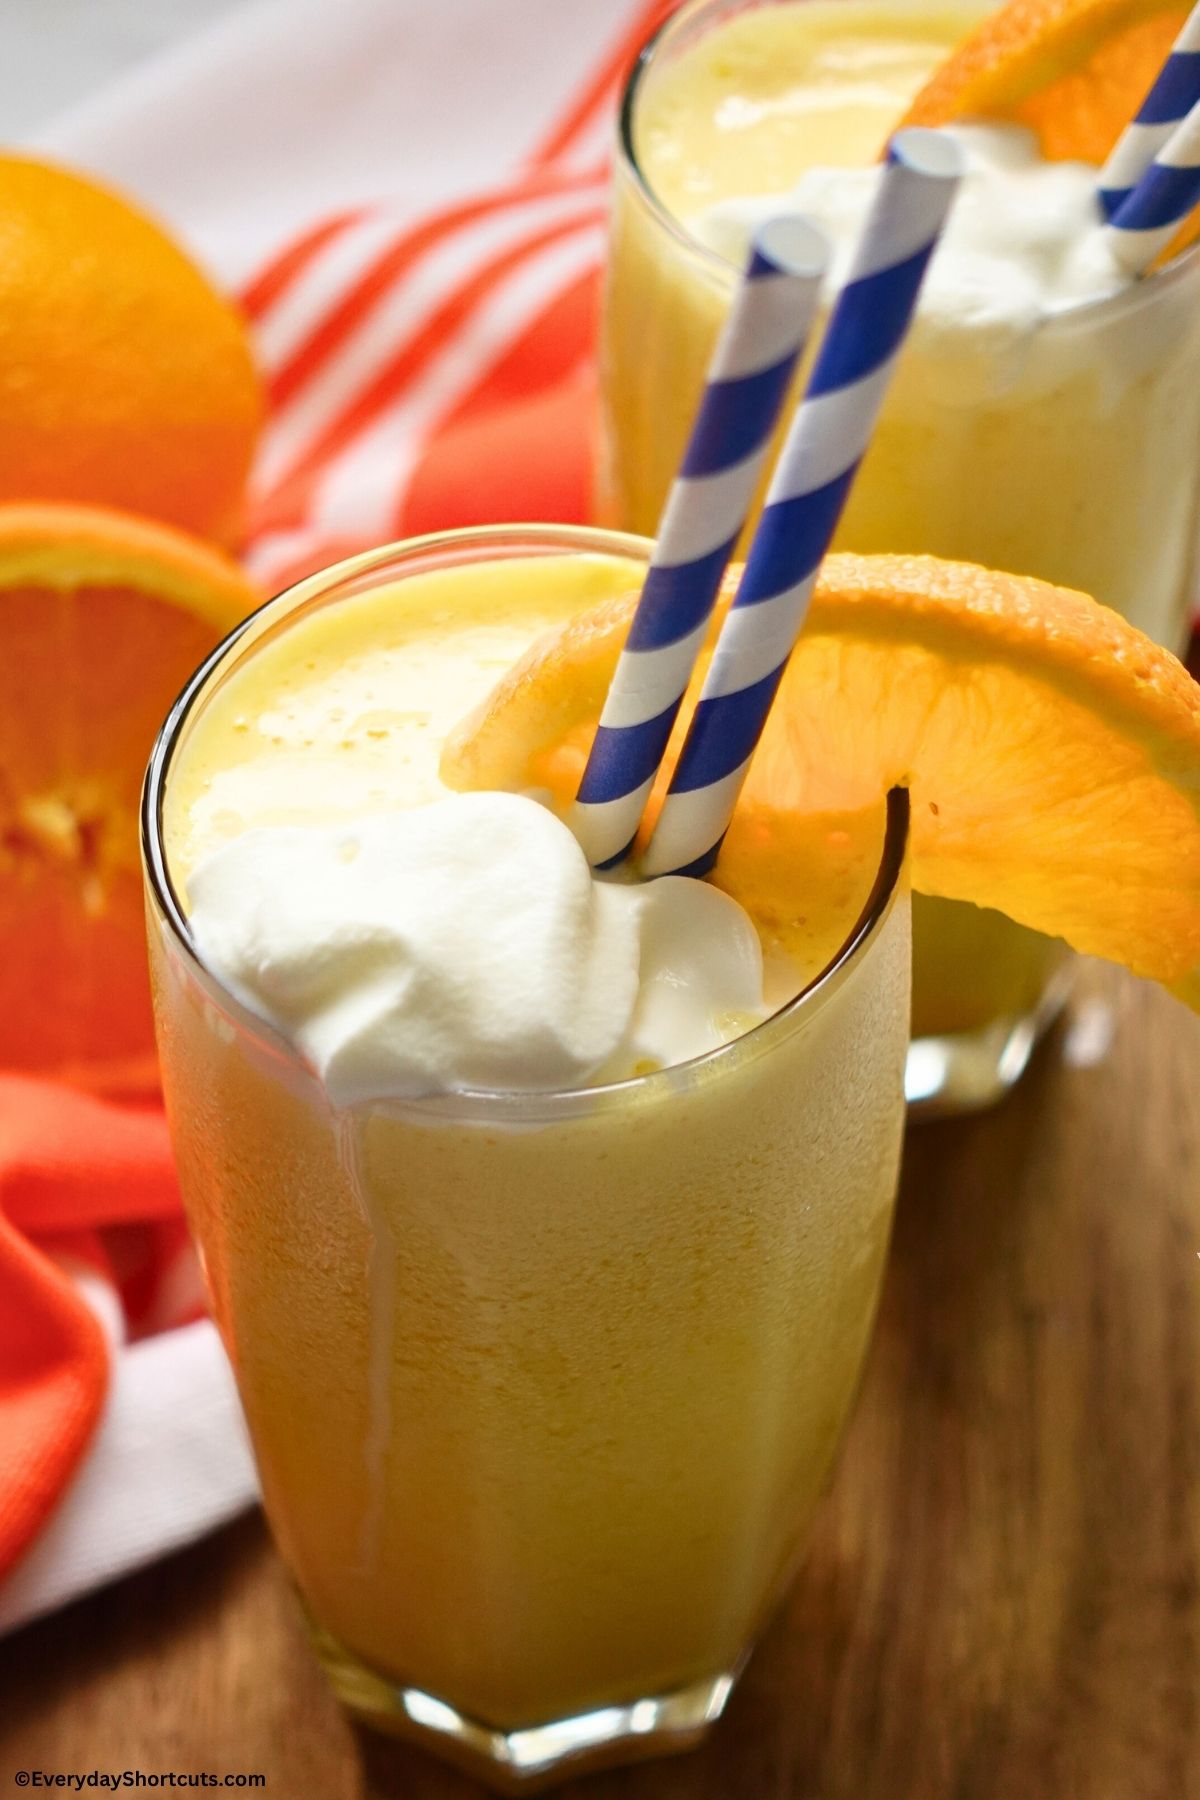 creamy Orange Julius drink in a glass with a orange slice and straw